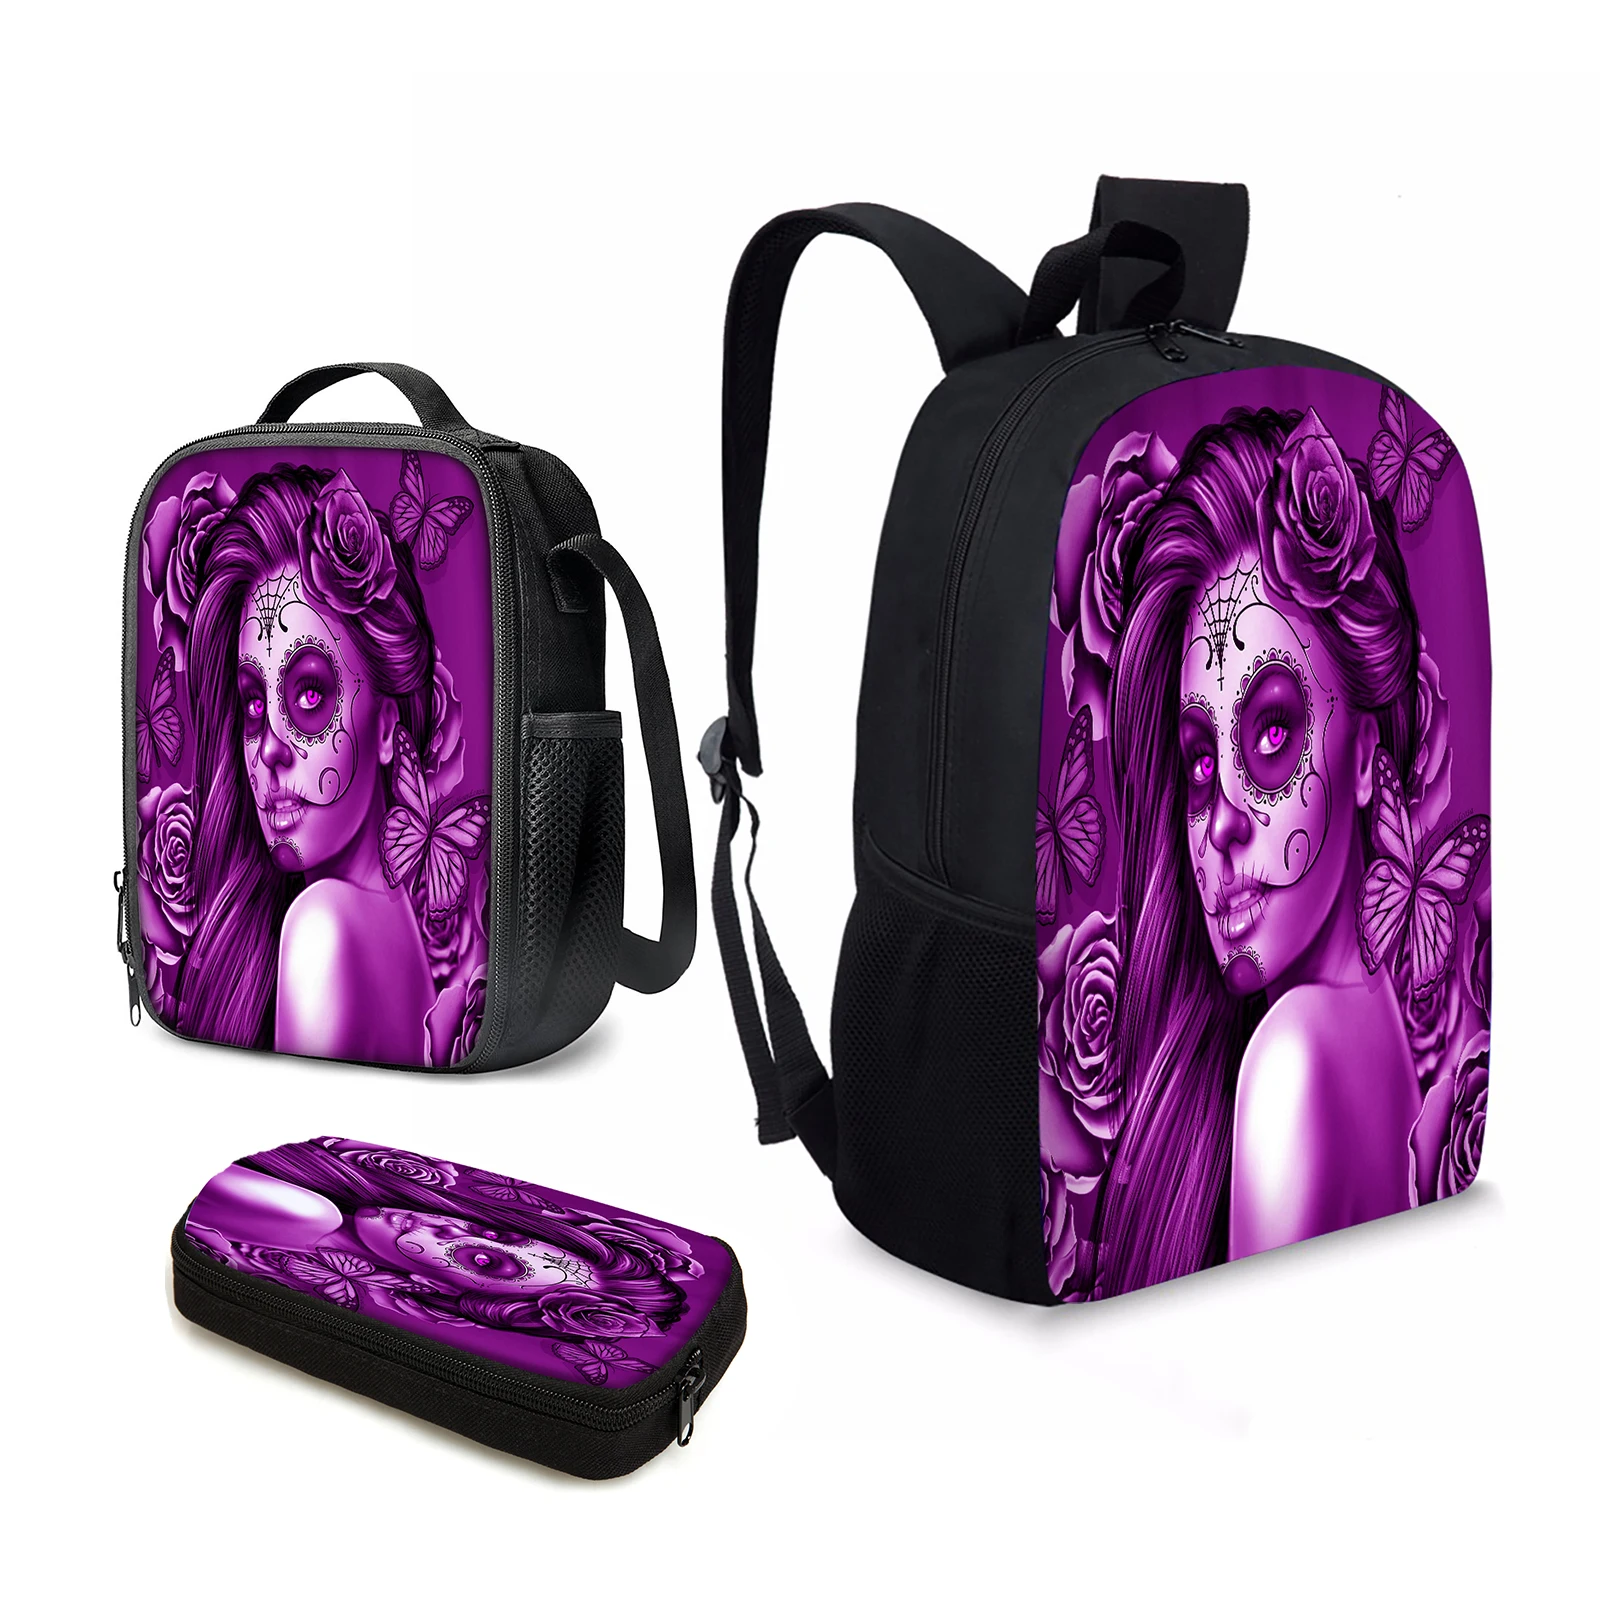 

YIKELUO Day Of The Dead Sugar Skull Girl Butterfly 3D Print Purple Brand Backpack Student Textbook Knapsack With Zip Lunch Bag